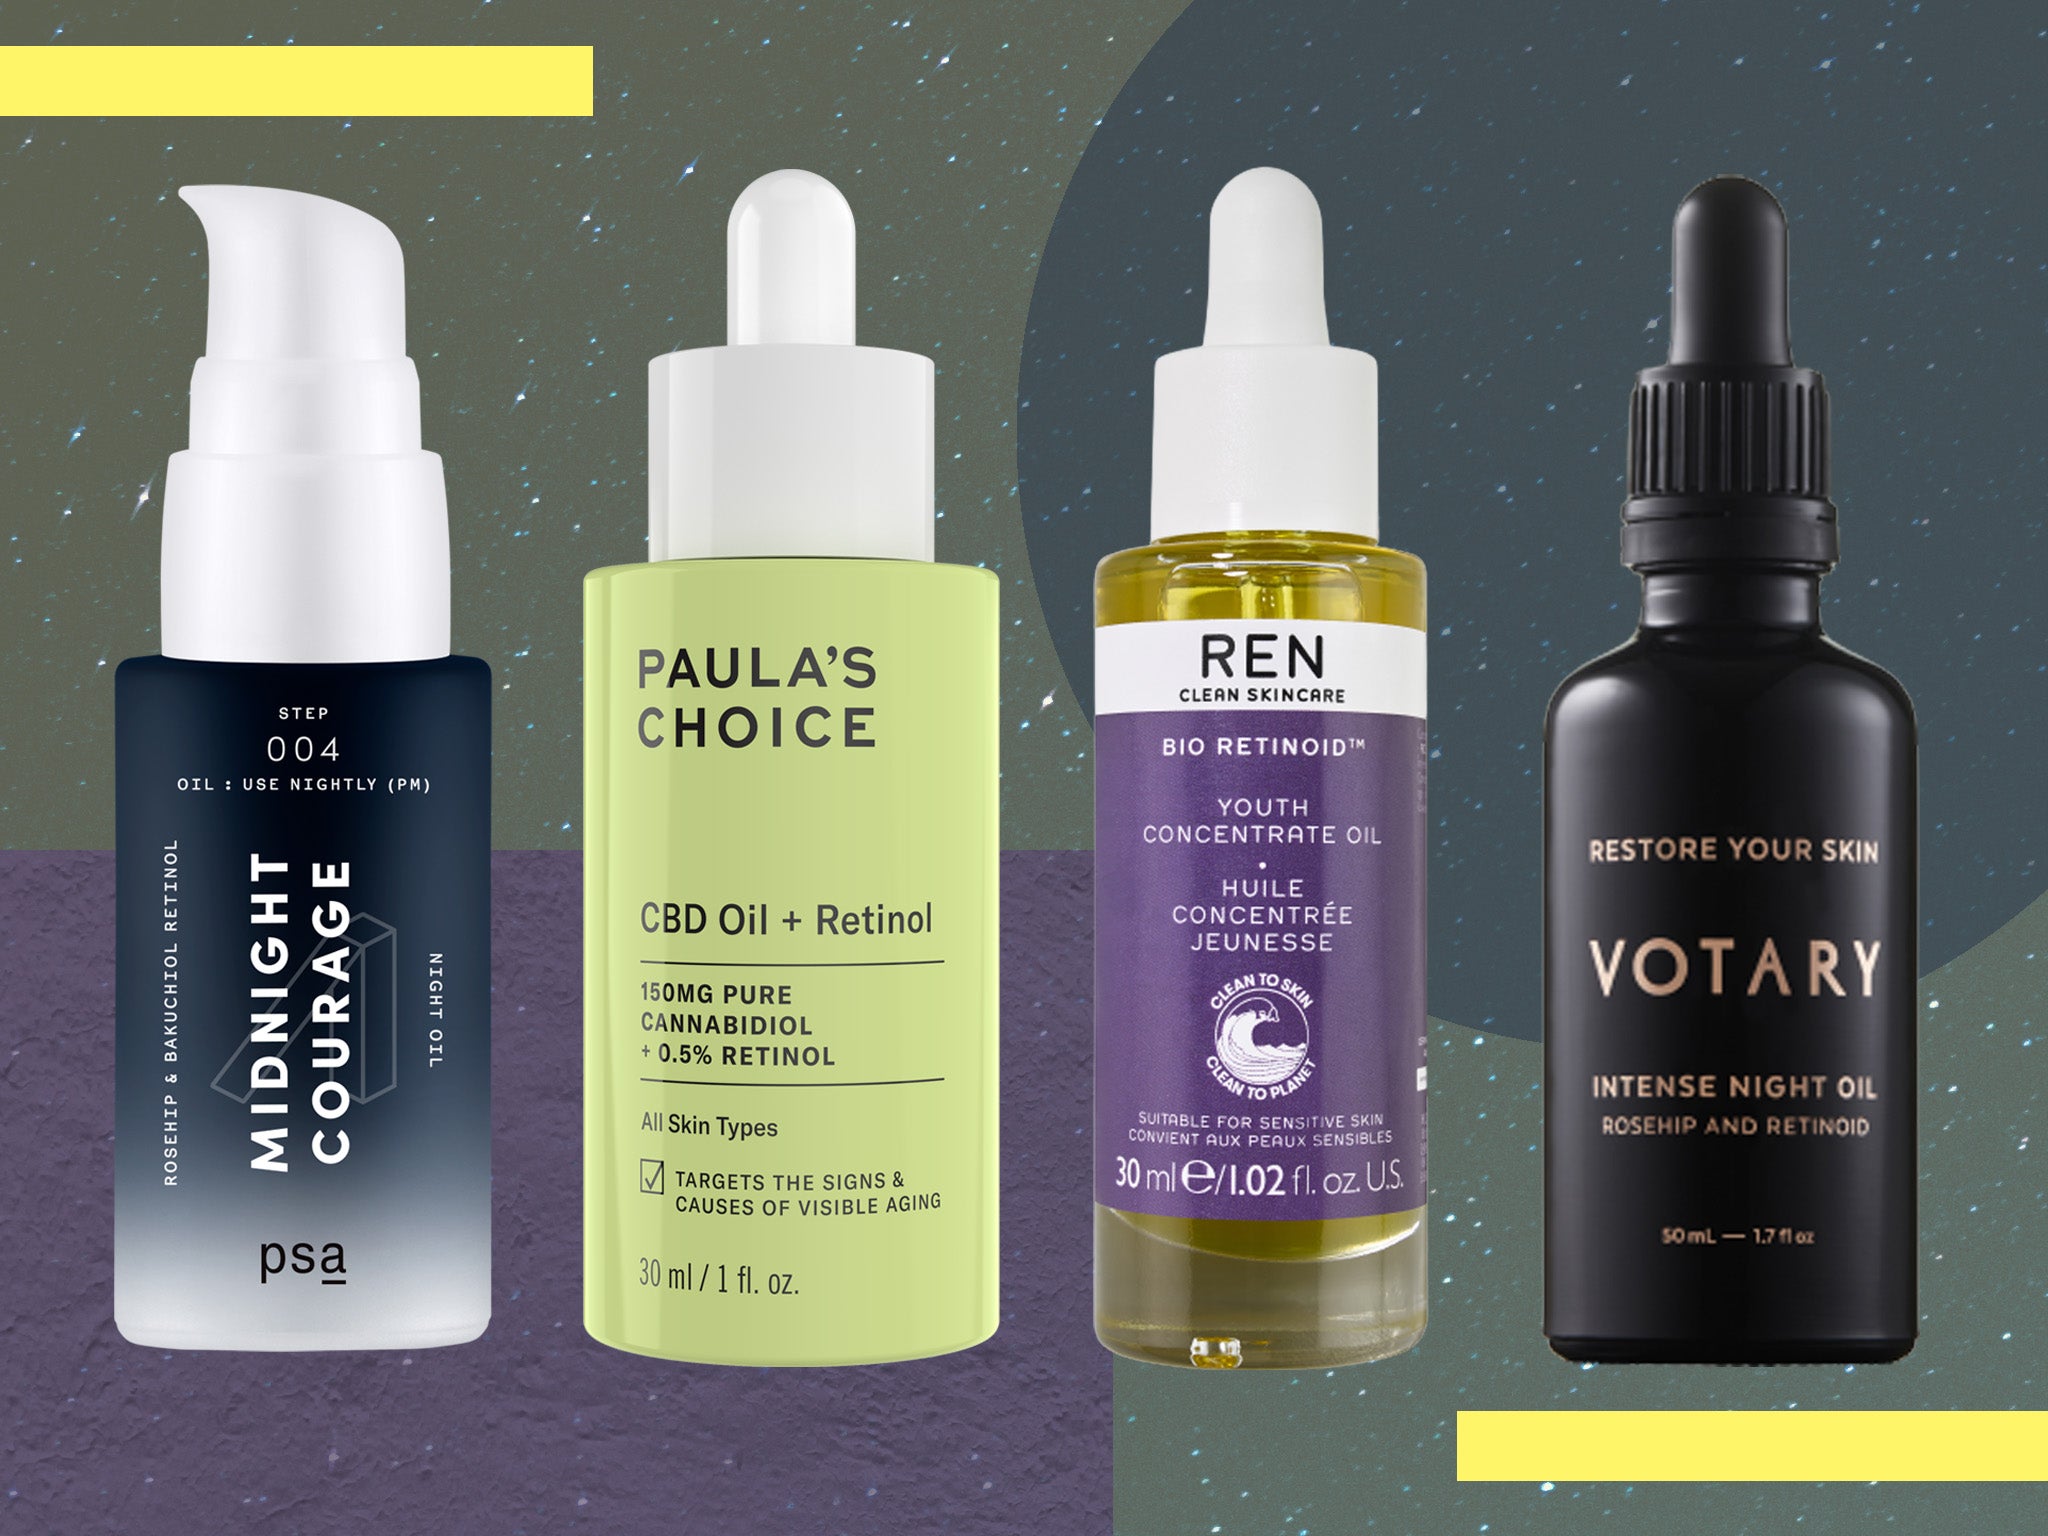 10 best night oils that hydrate, firm and brighten all skin types